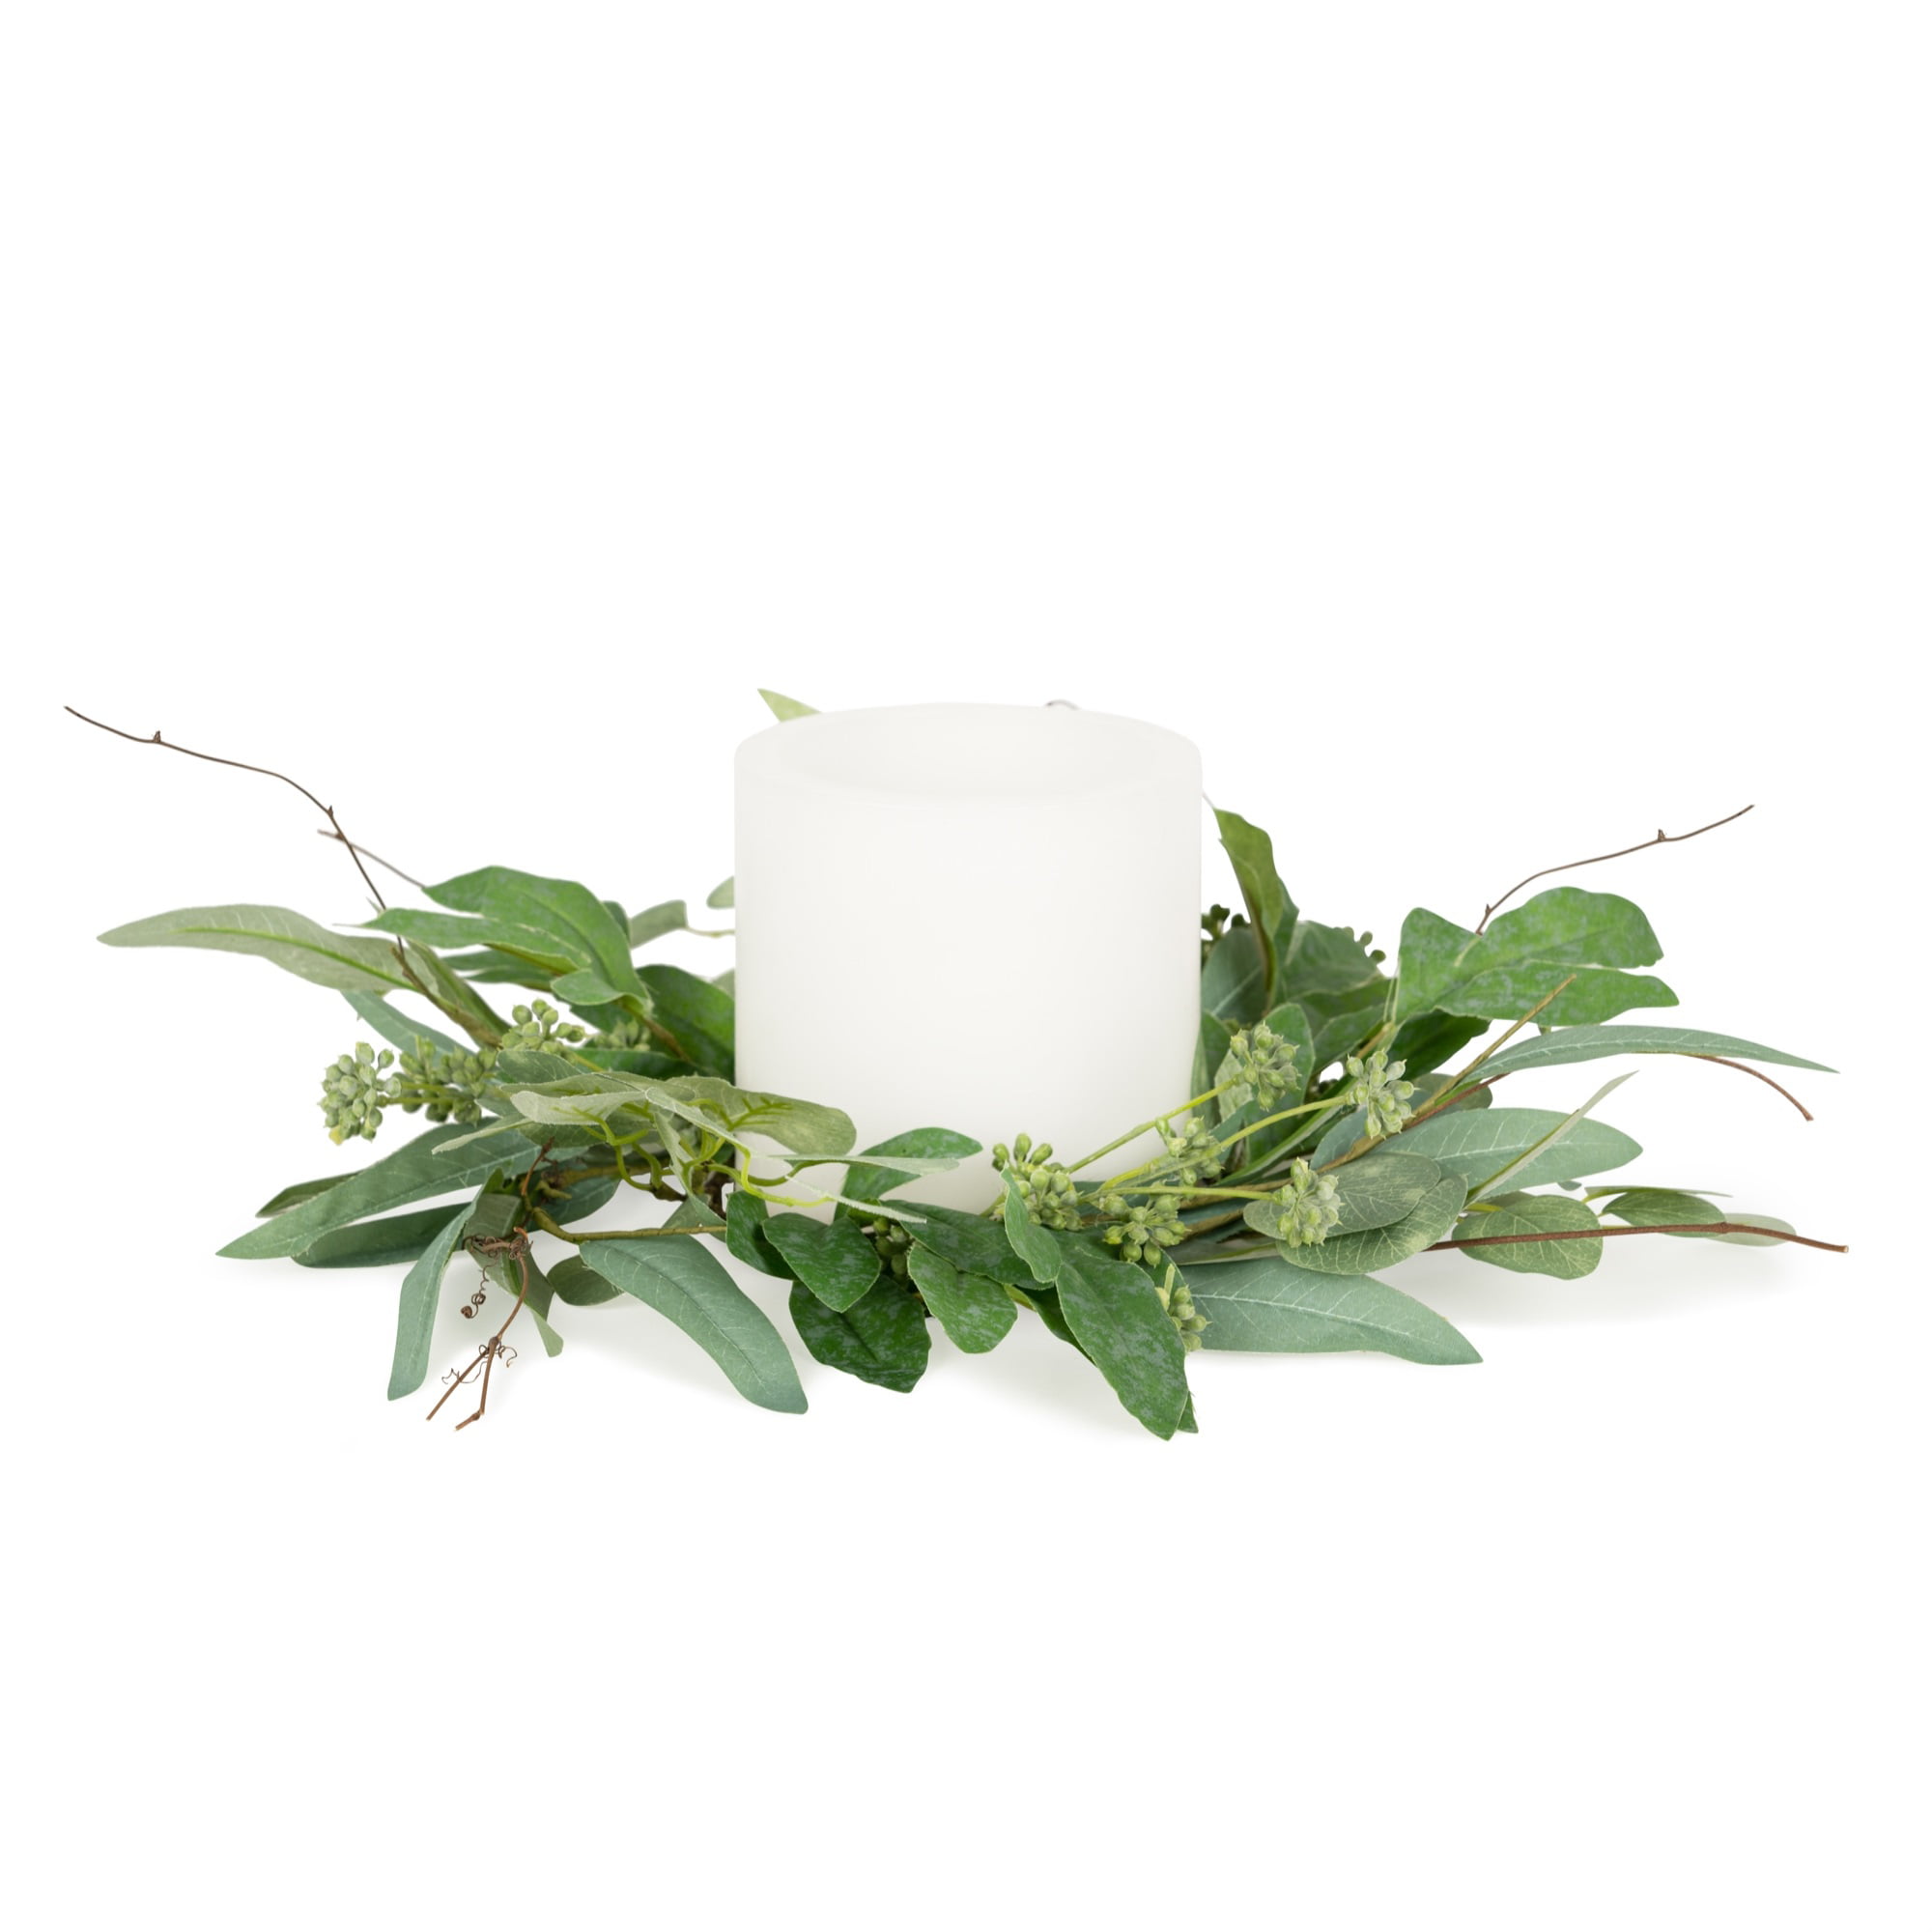 Mixed Eucalyptus Candle Ring 20"D Fabric (Fits a 6" Candle)